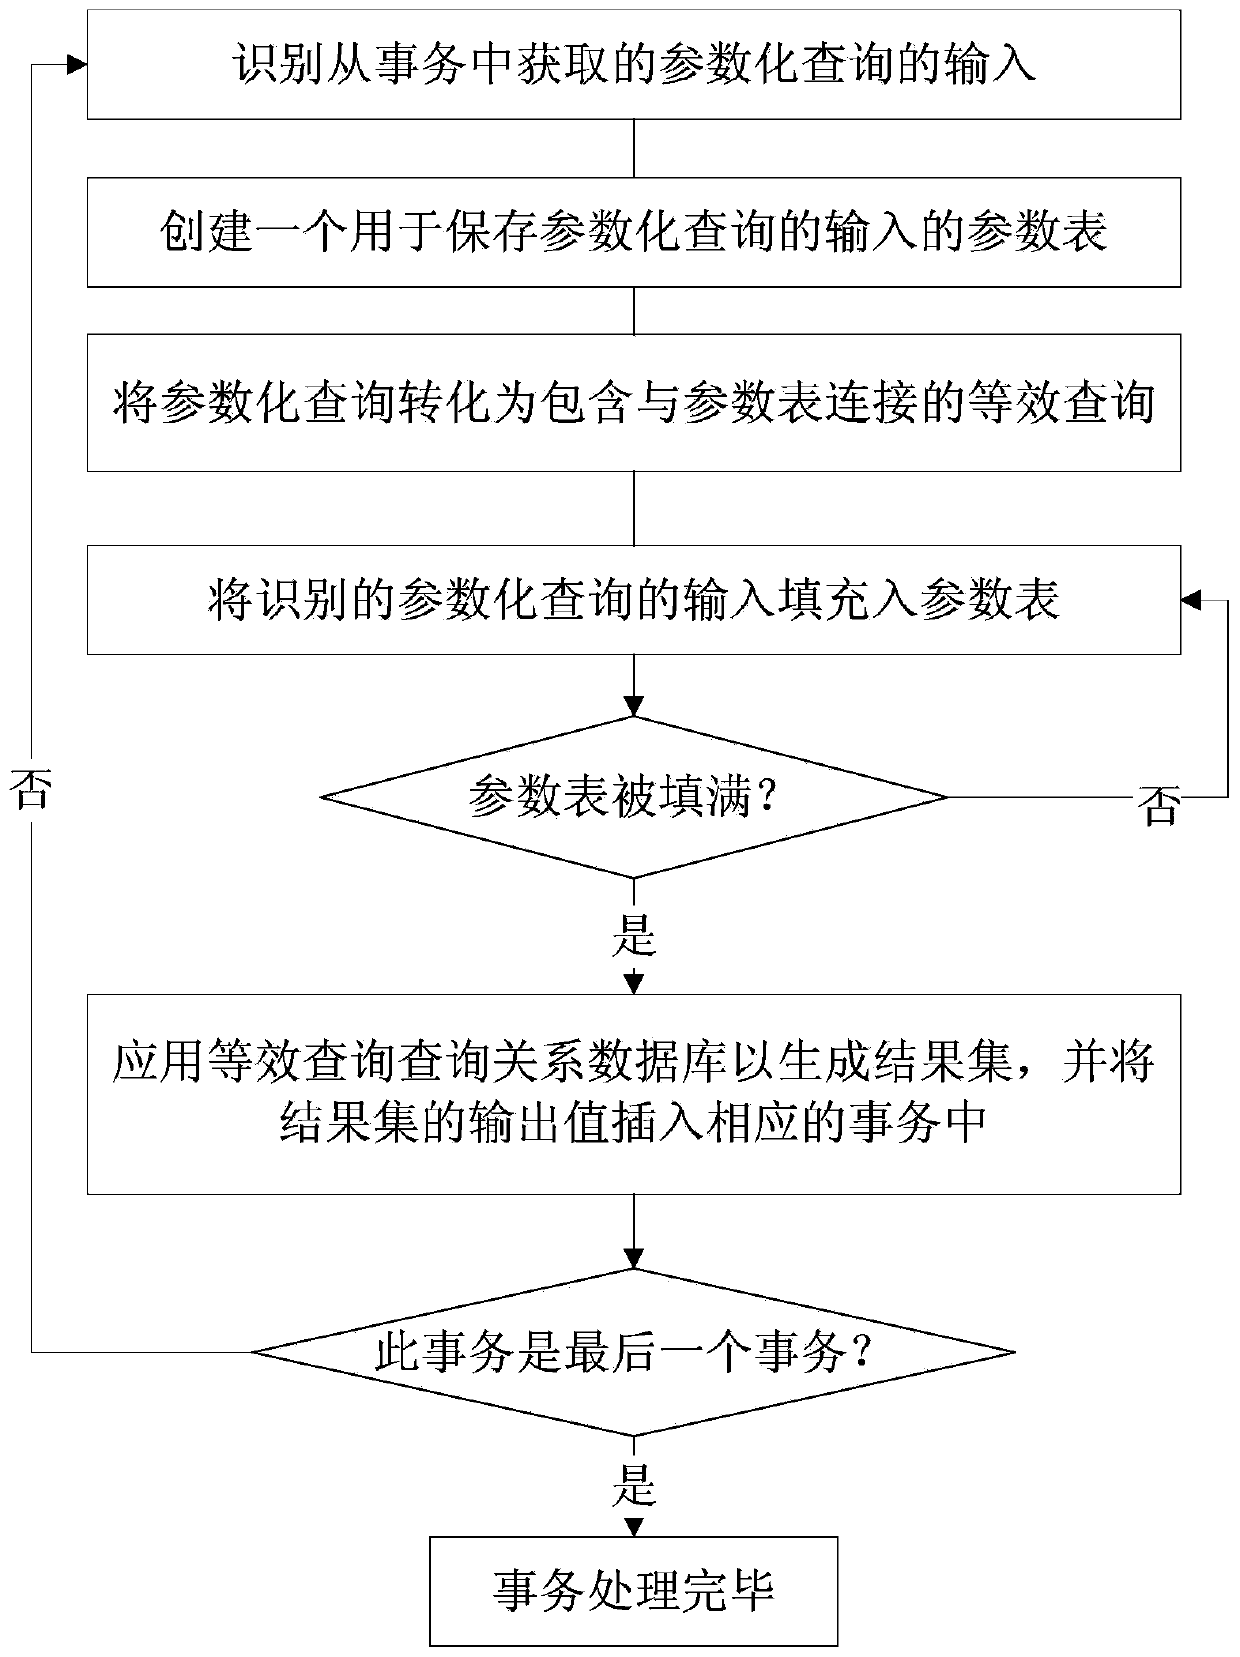 A streaming transaction processing method and system